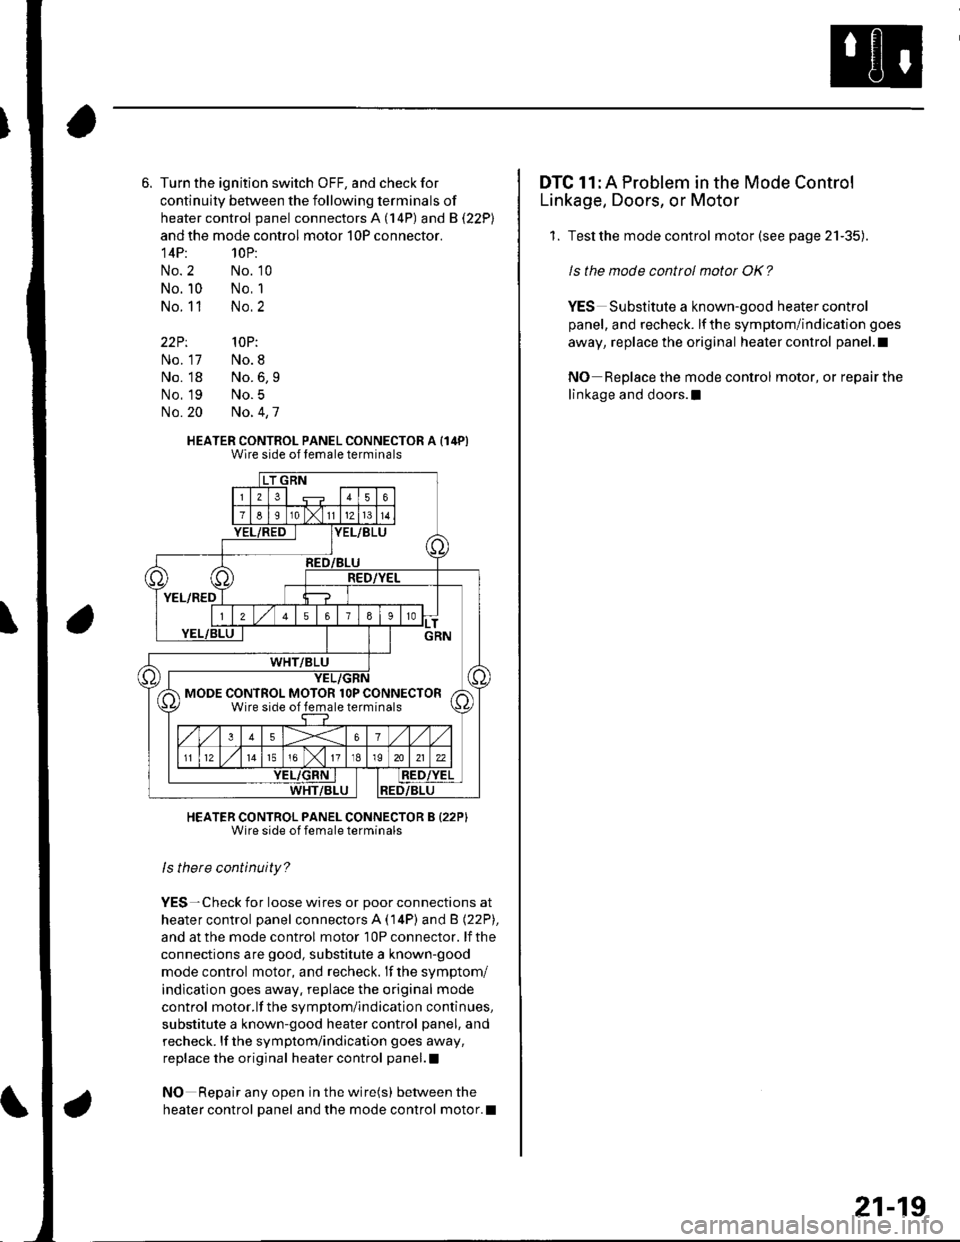 HONDA CIVIC 2003 7.G Service Manual Turn the ignition switch OFF, and check for
continuity between the following terminals of
heater control panel connectors A (14P) and B (22P)
and the mode control motor 10P connector.
14P: 10P:
No. 2 